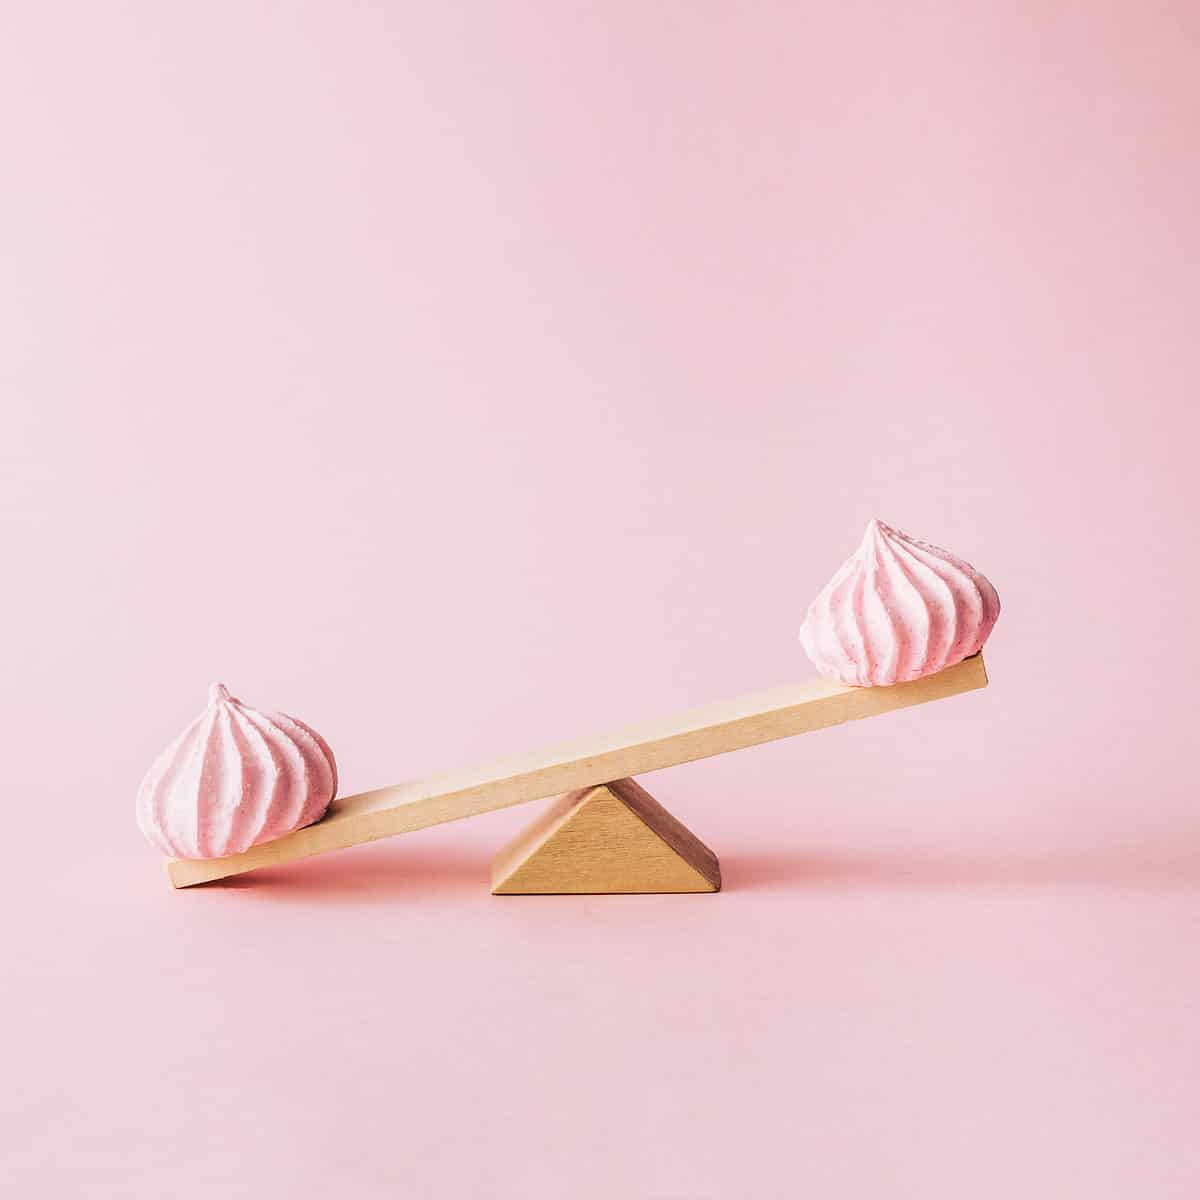 Center frame of a photo is a triangle wedge of wood on top of which is a proportionate size plank of wood. The left side of the wood is down on the pink surface on which the fulcrum is placed. The right side is up in the air. On each end of the liver is a pink macaroon. The whole photo is shot against pink isolate.